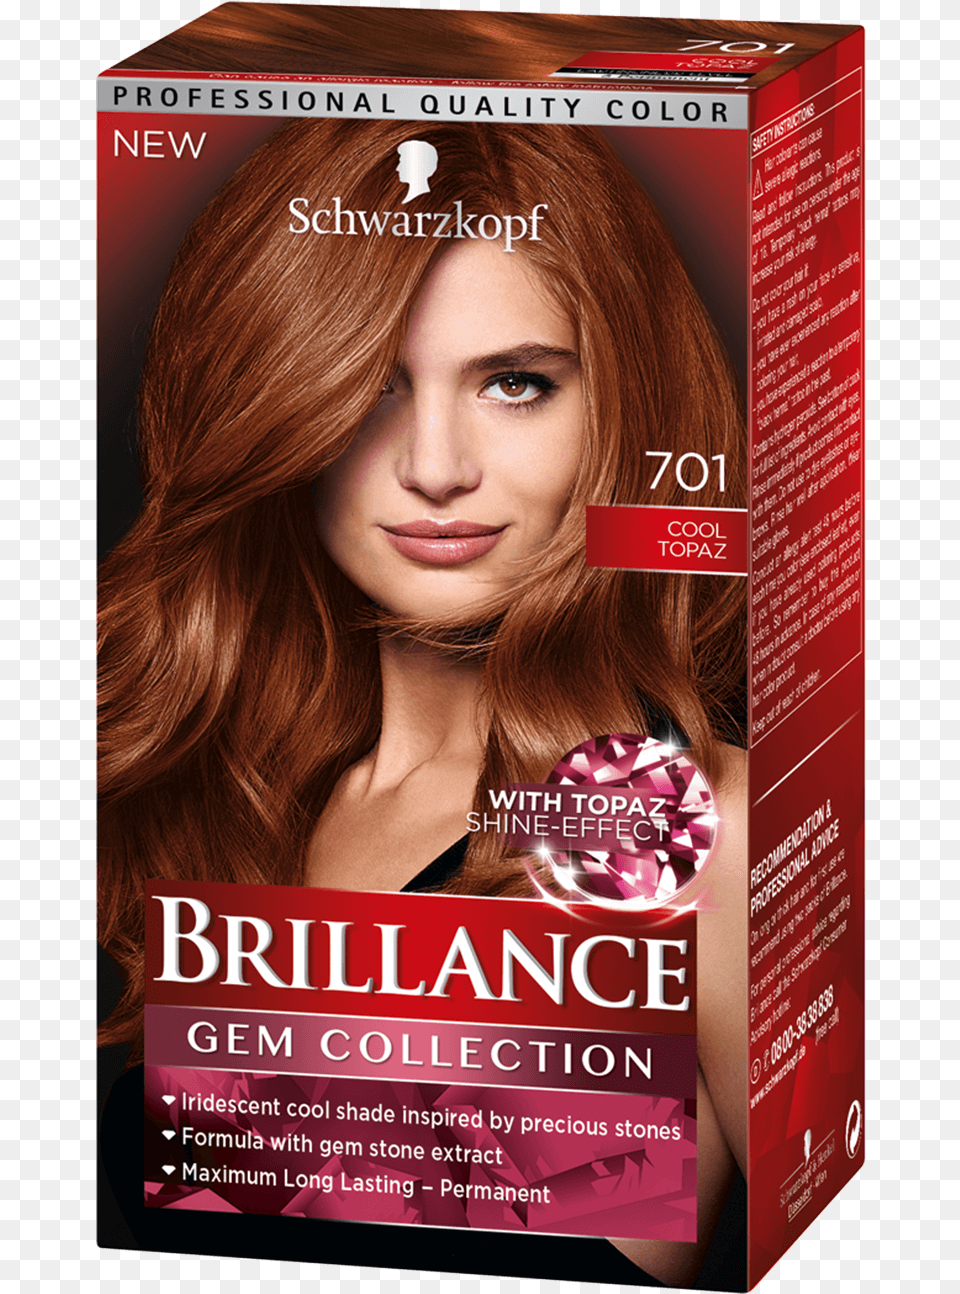 Brillance Com Gem Collection 701 Cool Topaz Schwarzkopf Brilliance 01 Fiery Topaz, Adult, Poster, Person, Woman Free Transparent Png